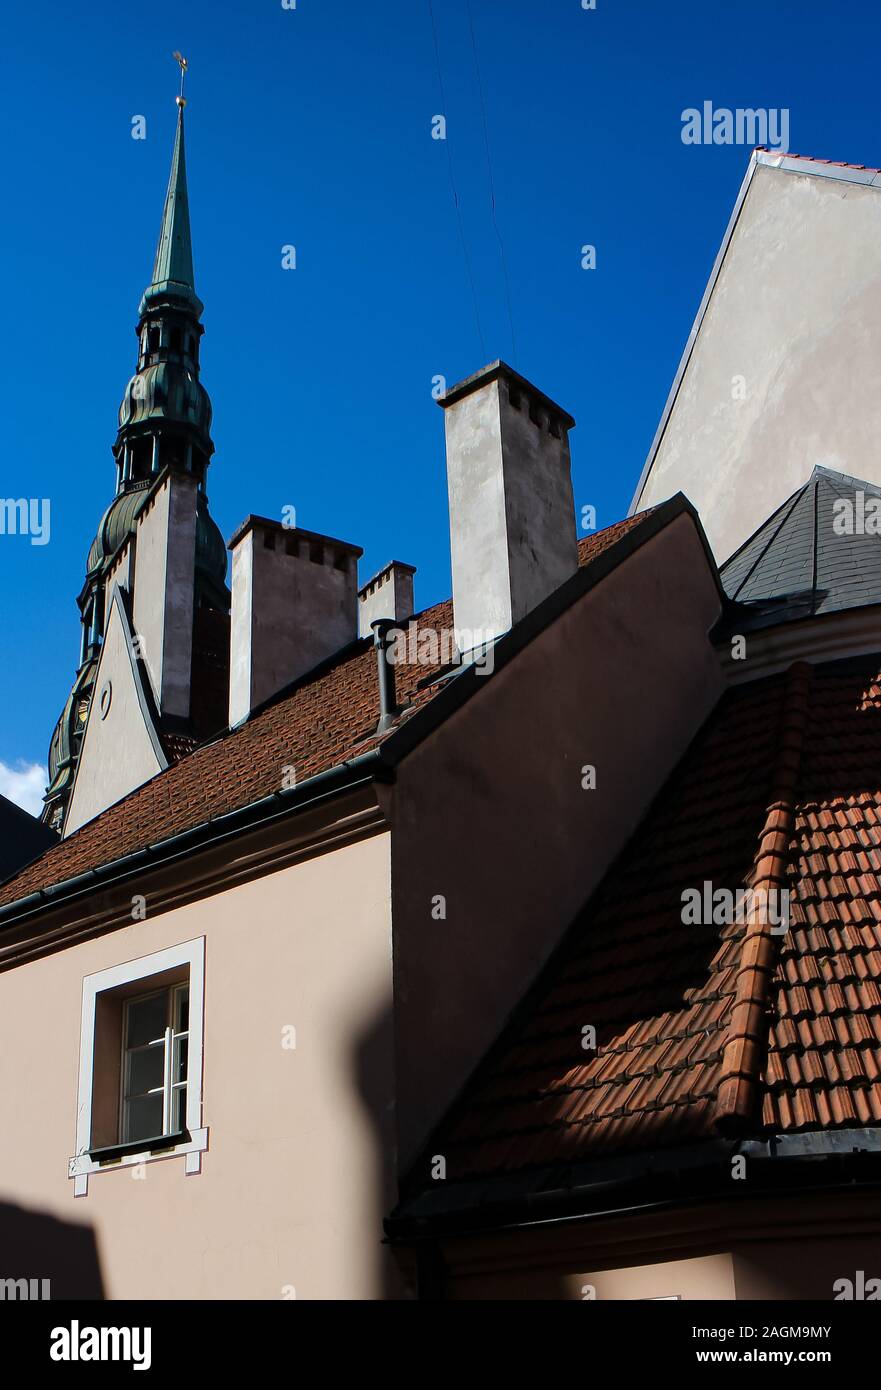 Street scene in Riga, Latvia, with the spire of St. Peter's Church visible behind residential buildings. Stock Photo